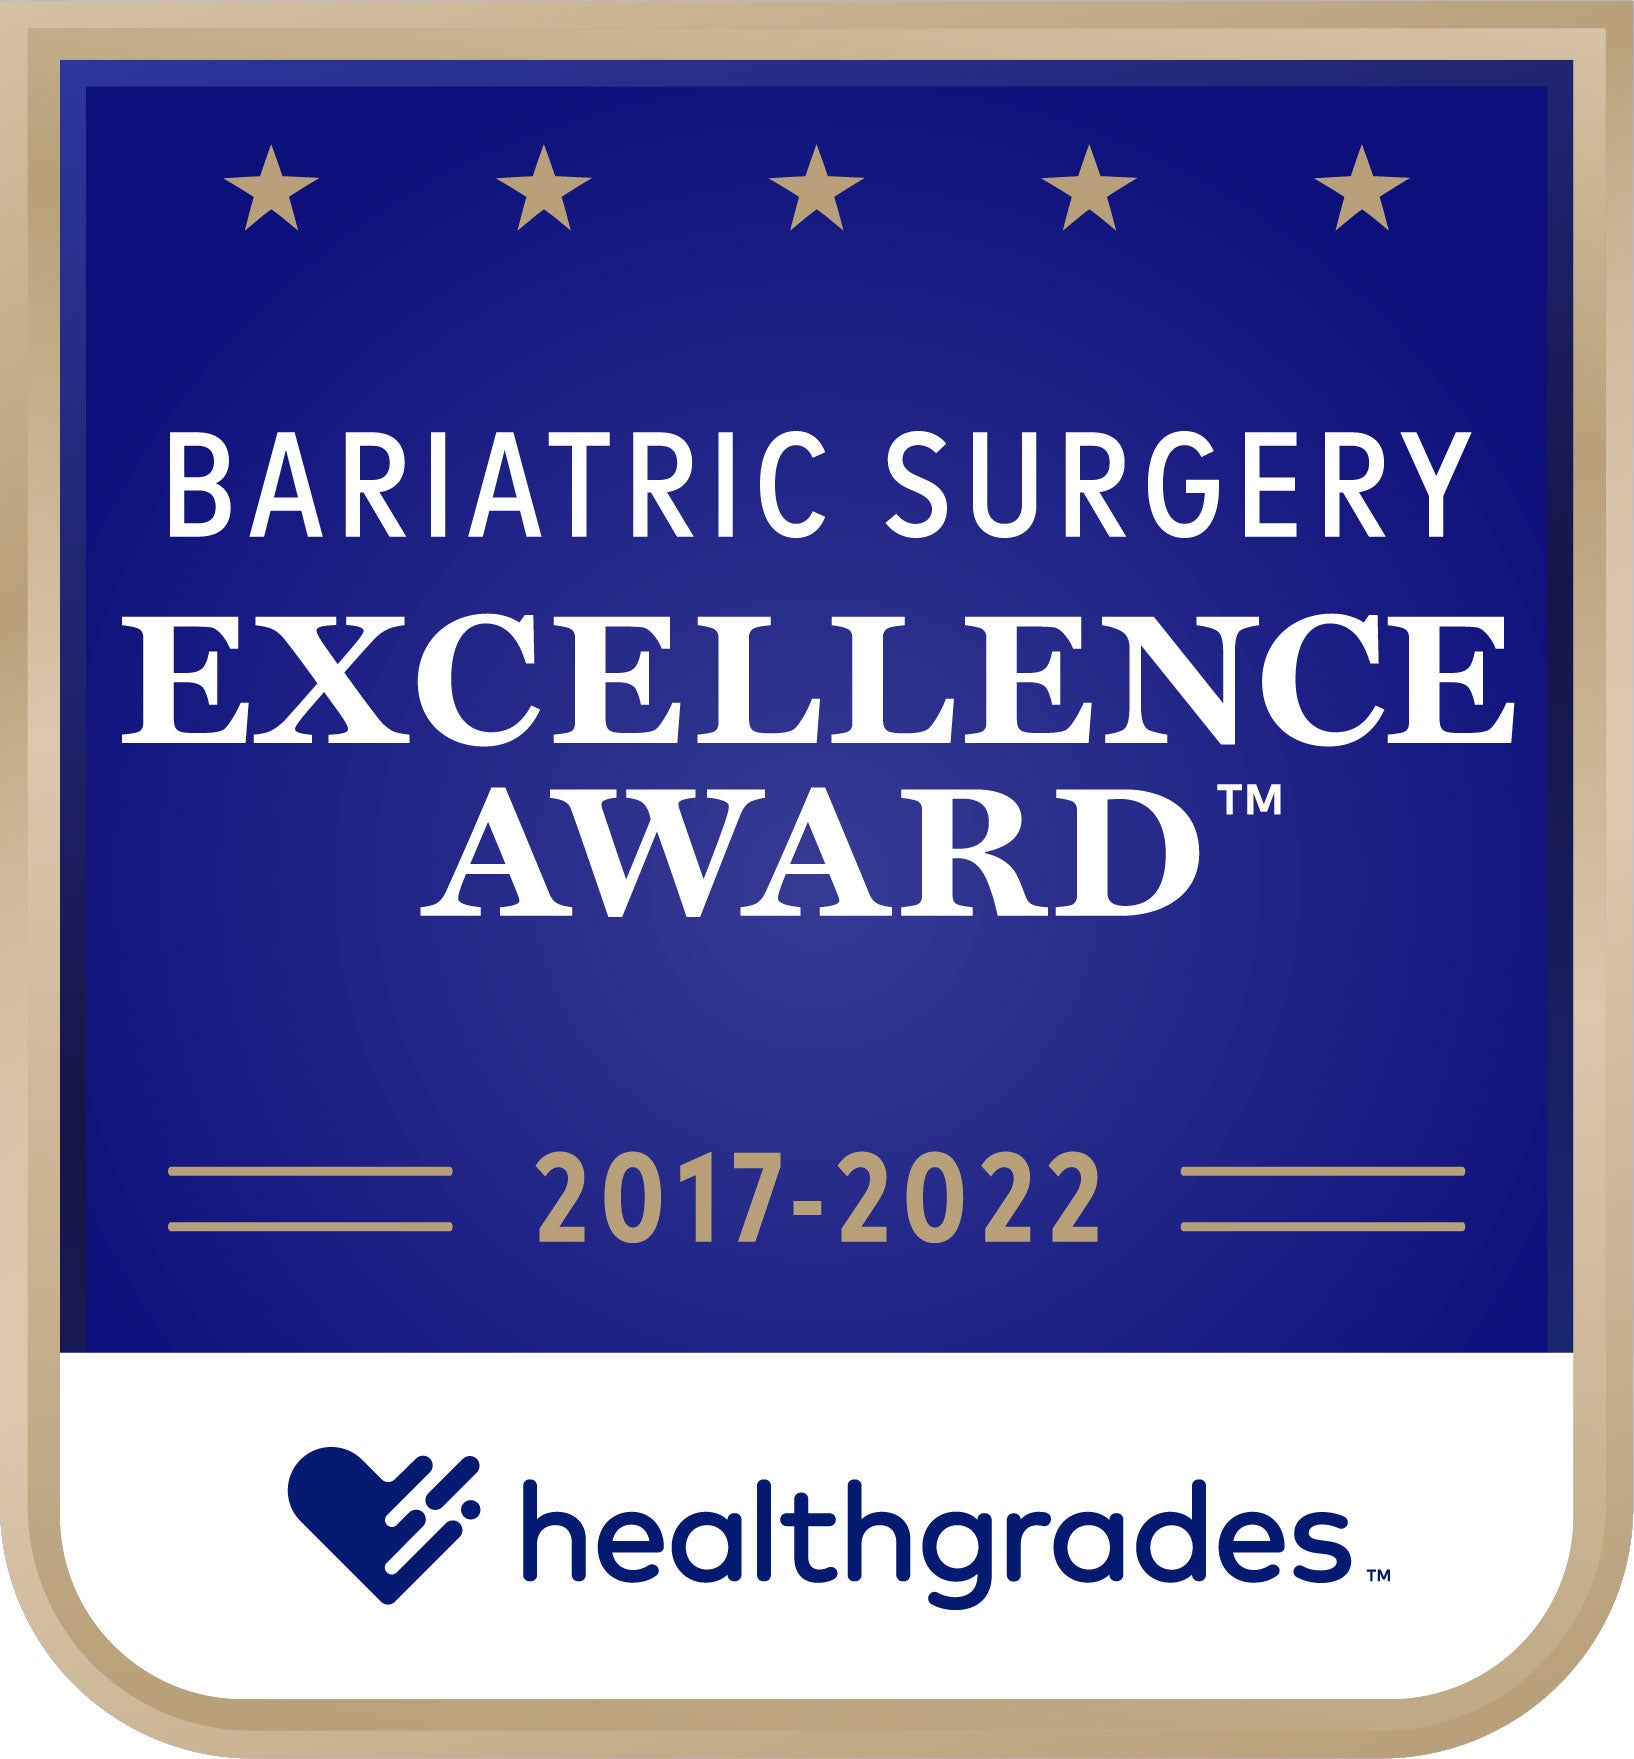 Recipient of the Healthgrades Bariatric Surgery Excellence Award™ for 4 Years in a Row (2017-2020)